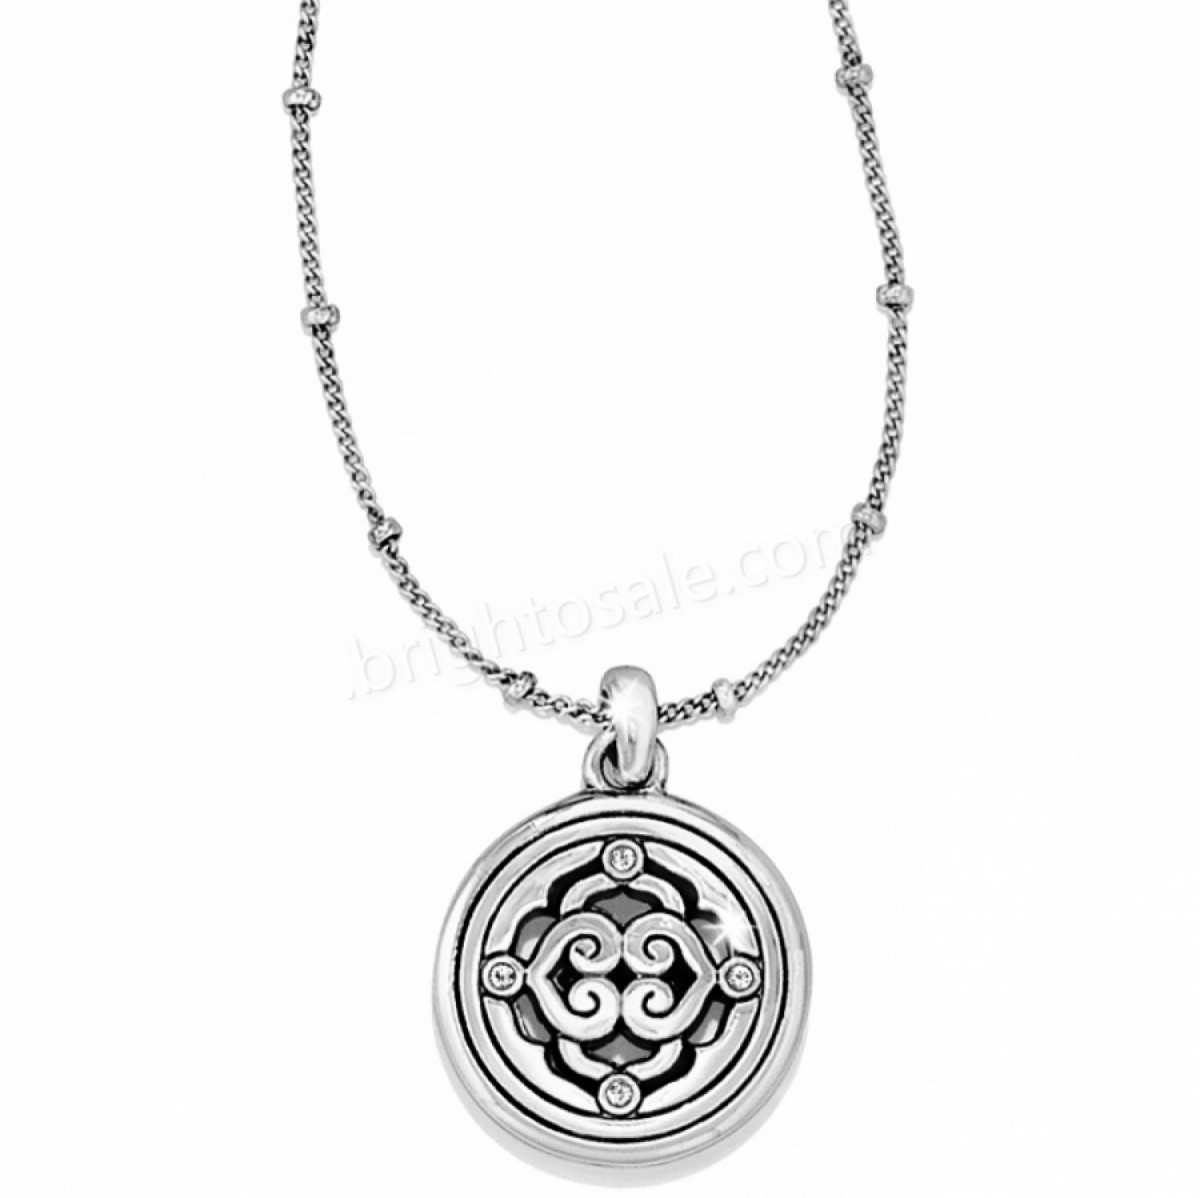 Brighton Collectibles & Online Discount Intrigue Small Necklace - -1